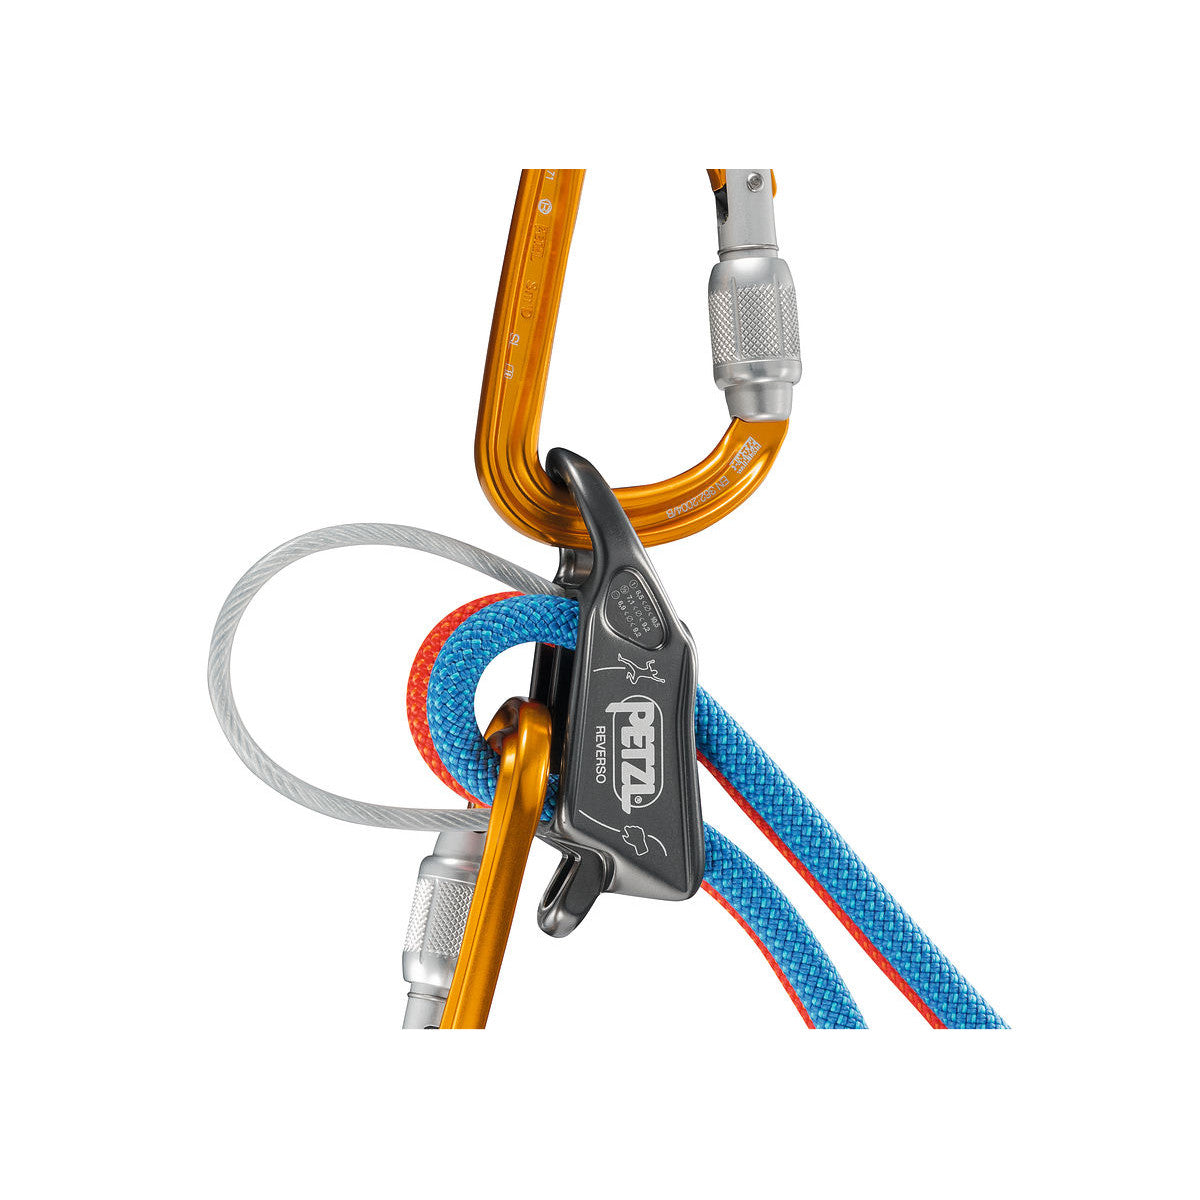 Petzl Reverso belay device shown in use in guide mode, with blue rope and orange carabiners